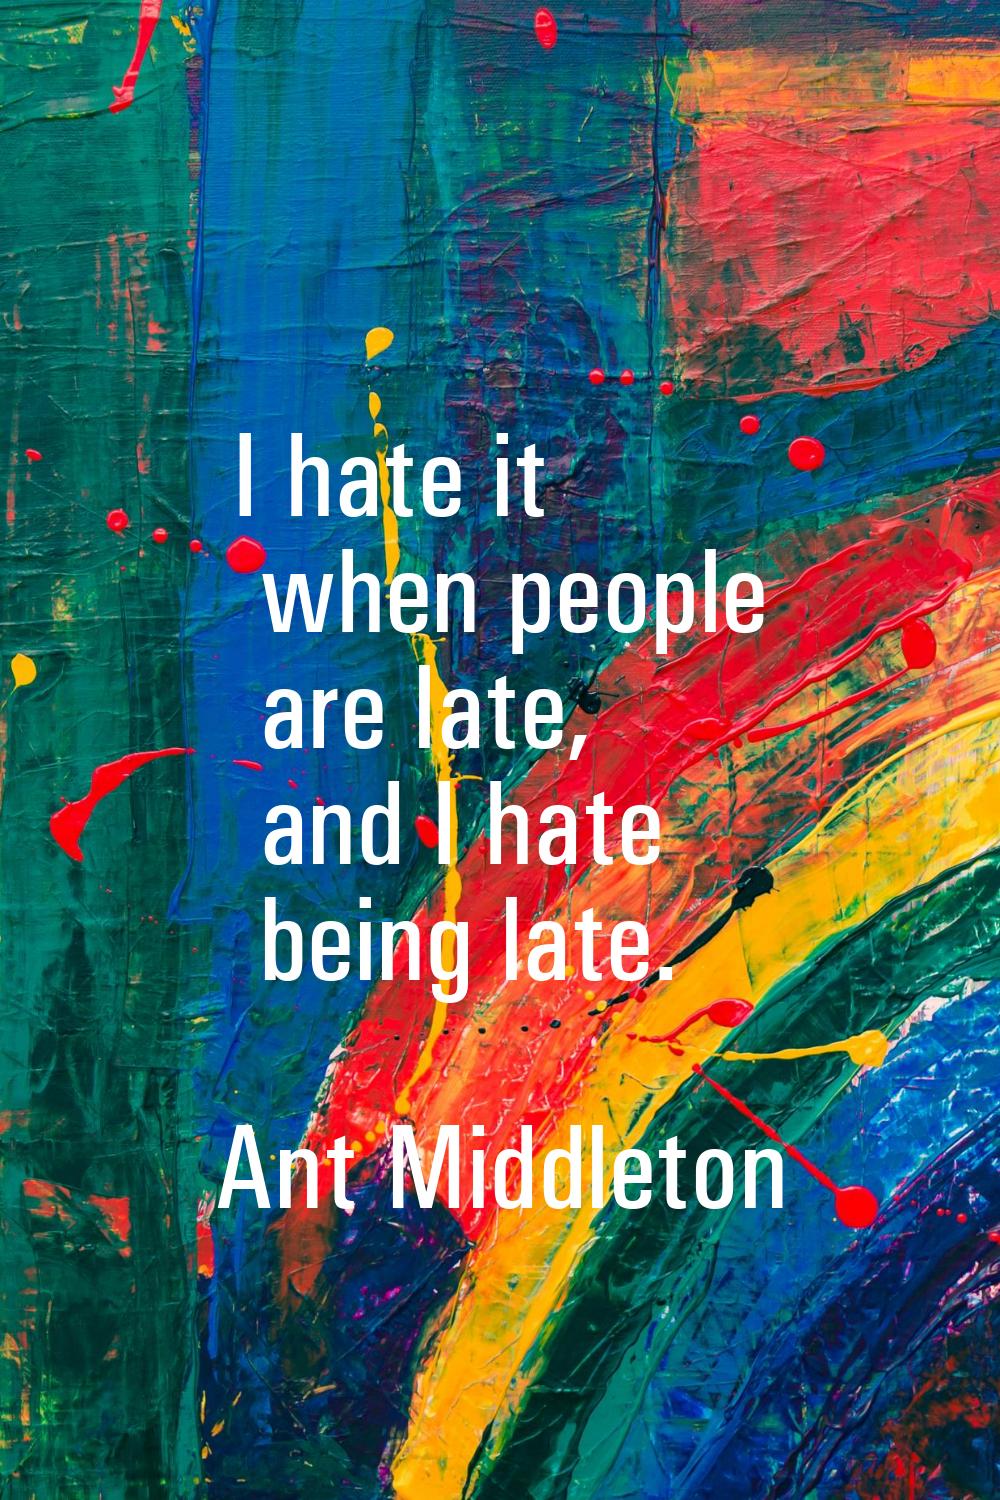 I hate it when people are late, and I hate being late.